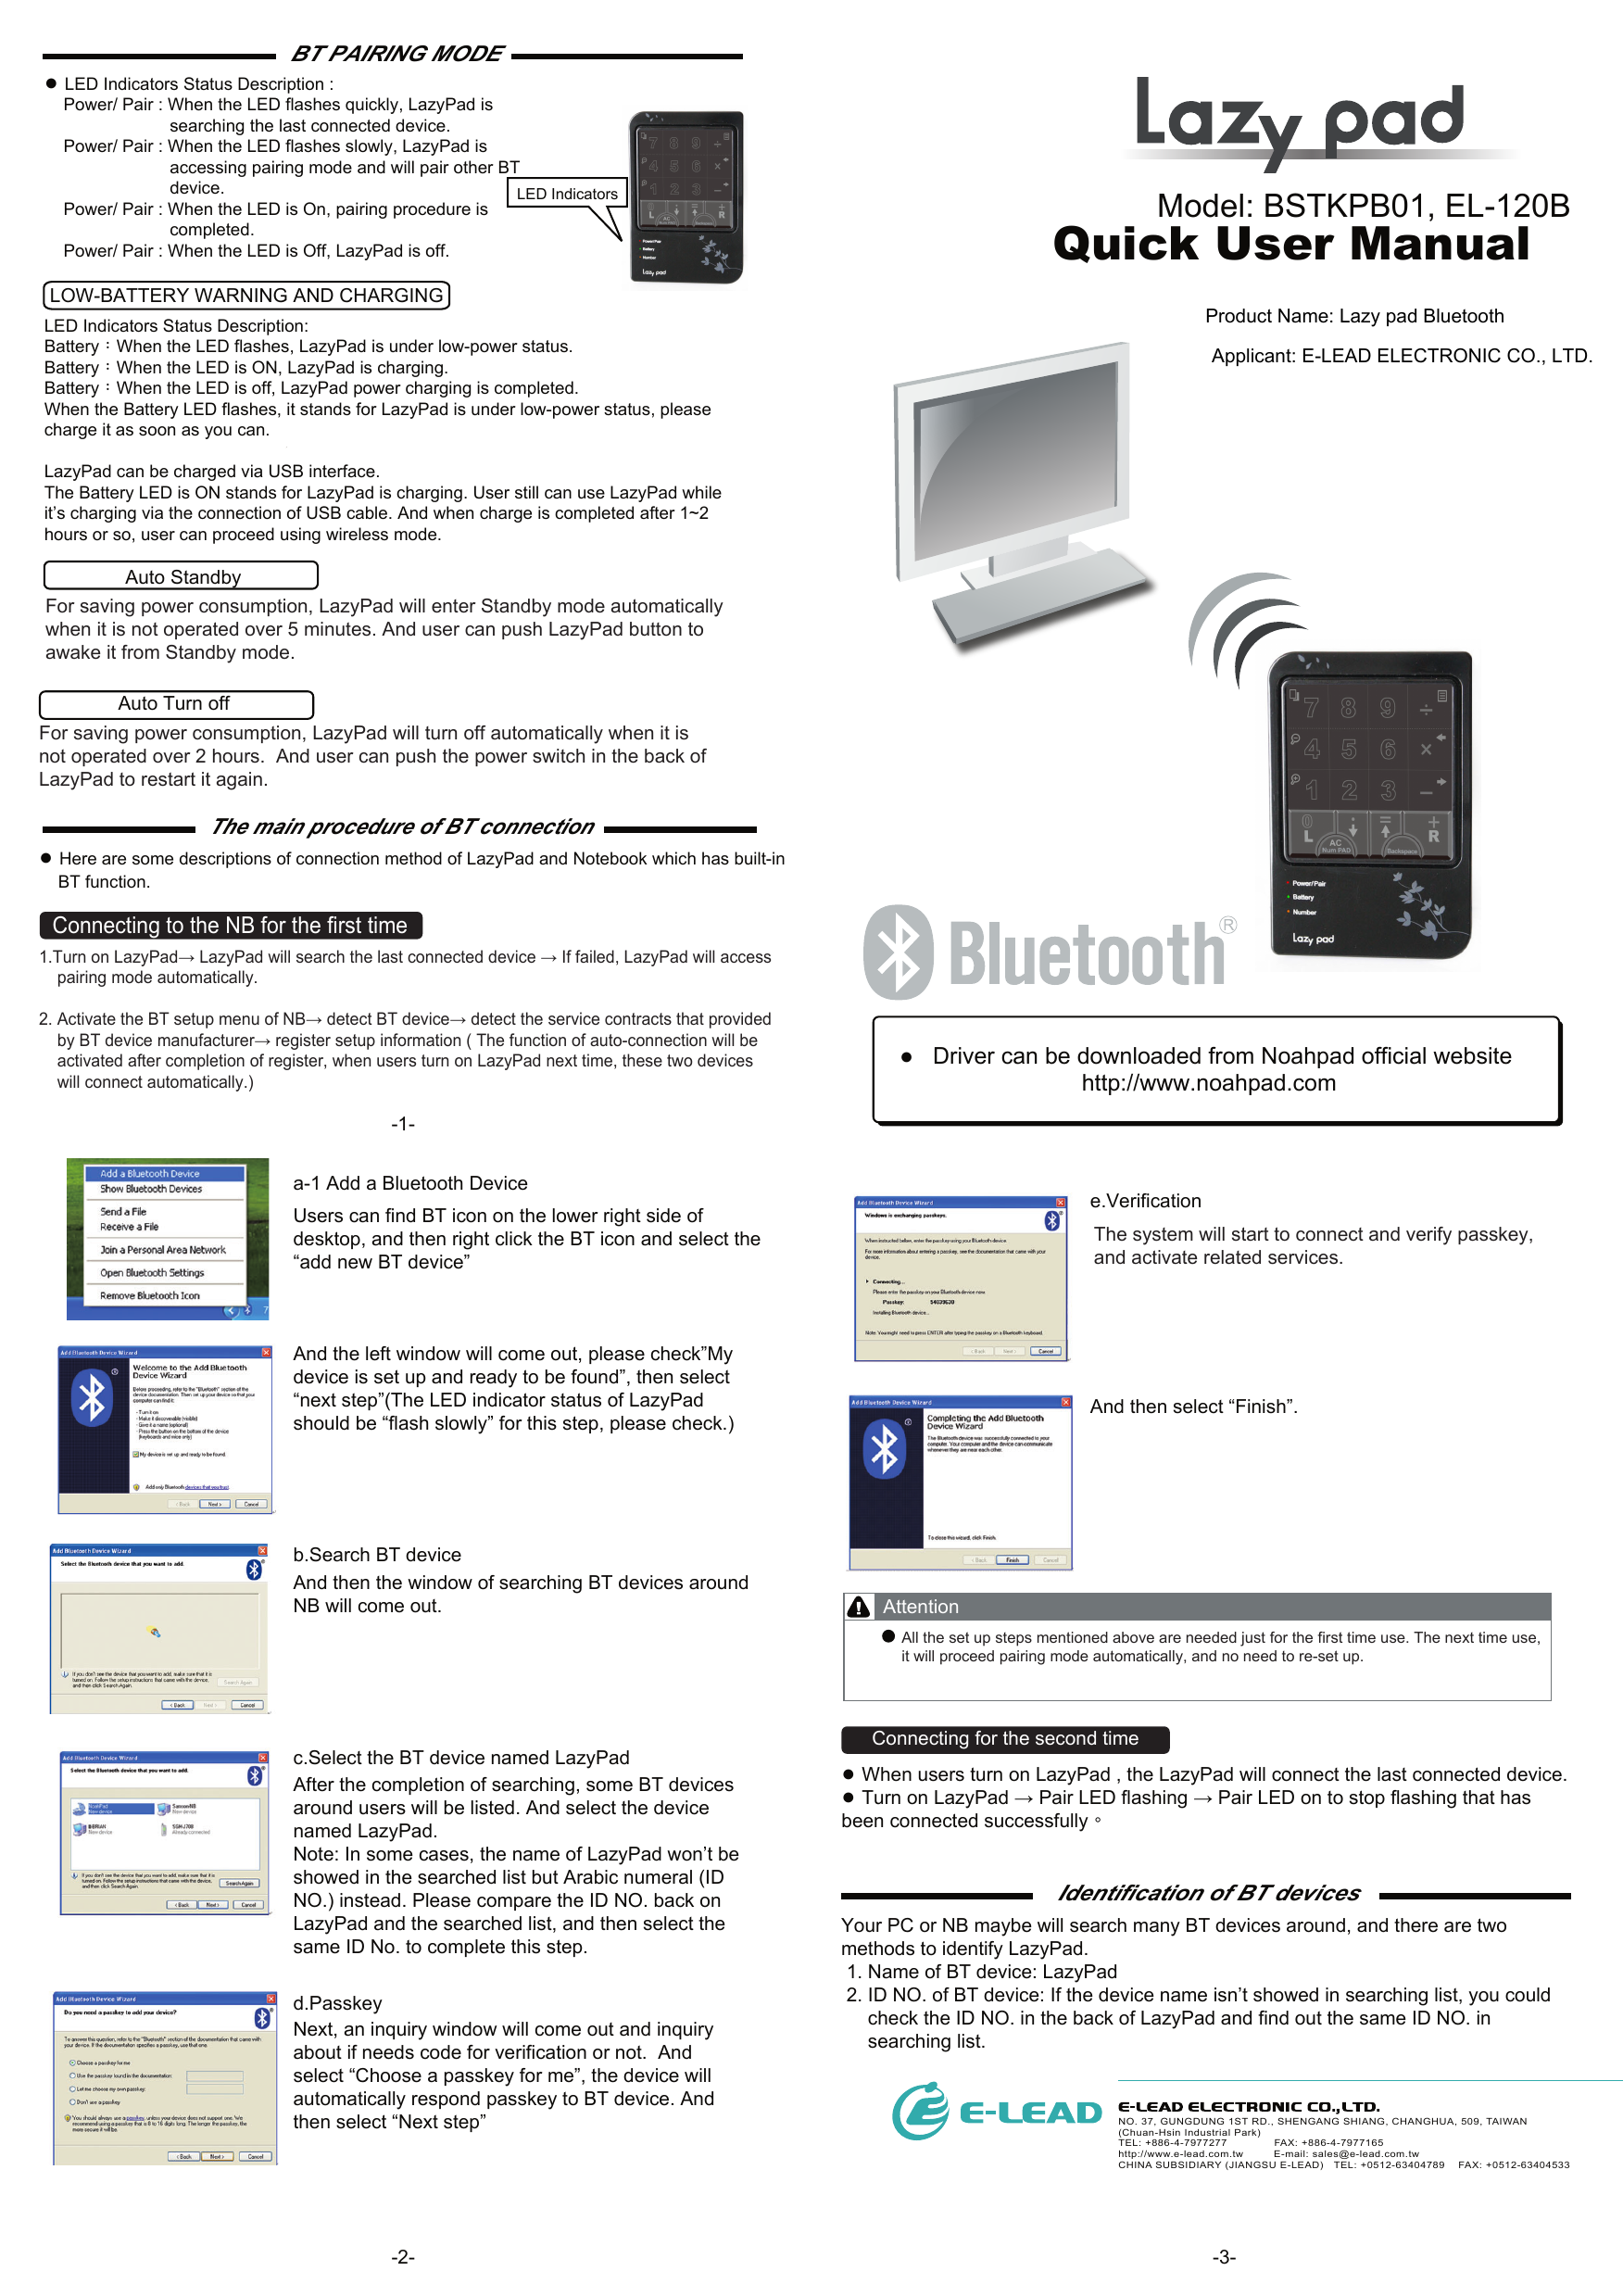 BT PAIRING MODE-2- -3--1-Model: BSTKPB01, EL-120BQuick User Manual ●   Driver can be downloaded from Noahpad official website http://www.noahpad.comNO. 37, GUNGDUNG 1ST RD., SHENGANG SHIANG, CHANGHUA, 509, TAIWAN (Chuan-Hsin Industrial Park)     TEL: +886-4-7977277              FAX: +886-4-7977165http://www.e-lead.com.tw         E-mail: sales@e-lead.com.twCHINA SUBSIDIARY (JIANGSU E-LEAD)   TEL: +0512-63404789    FAX: +0512-63404533● LED Indicators Status Description :    Power/ Pair : When the LED flashes quickly, LazyPad is                          searching the last connected device.     Power/ Pair : When the LED flashes slowly, LazyPad is                          accessing pairing mode and will pair other BT                          device.    Power/ Pair : When the LED is On, pairing procedure is                          completed.    Power/ Pair : When the LED is Off, LazyPad is off.LED Indicators Status Description:Battery：When the LED flashes, LazyPad is under low-power status.Battery：When the LED is ON, LazyPad is charging. Battery：When the LED is off, LazyPad power charging is completed.When the Battery LED flashes, it stands for LazyPad is under low-power status, please charge it as soon as you can.LazyPad can be charged via USB interface. The Battery LED is ON stands for LazyPad is charging. User still can use LazyPad while it’s charging via the connection of USB cable. And when charge is completed after 1~2 hours or so, user can proceed using wireless mode.The main procedure of BT connection● Here are some descriptions of connection method of LazyPad and Notebook which has built-in    BT function.Your PC or NB maybe will search many BT devices around, and there are two methods to identify LazyPad. 1. Name of BT device: LazyPad 2. ID NO. of BT device: If the device name isn’t showed in searching list, you could      check the ID NO. in the back of LazyPad and find out the same ID NO. in     searching list.Identification of BT devicesLOW-BATTERY WARNING AND CHARGINGAuto Standby Auto Turn off a-1 Add a Bluetooth DeviceUsers can find BT icon on the lower right side of desktop, and then right click the BT icon and select the “add new BT device”And the left window will come out, please check”My device is set up and ready to be found”, then select “next step”(The LED indicator status of LazyPad should be “flash slowly” for this step, please check.)b.Search BT deviceAnd then the window of searching BT devices around NB will come out. c.Select the BT device named LazyPad After the completion of searching, some BT devices around users will be listed. And select the device named LazyPad.Note: In some cases, the name of LazyPad won’t be showed in the searched list but Arabic numeral (ID NO.) instead. Please compare the ID NO. back on LazyPad and the searched list, and then select the same ID No. to complete this step.  d.Passkey  Next, an inquiry window will come out and inquiry about if needs code for verification or not.  And select “Choose a passkey for me”, the device will automatically respond passkey to BT device. And then select “Next step”e.VerificationAnd then select “Finish”.● When users turn on LazyPad , the LazyPad will connect the last connected device.● Turn on LazyPad → Pair LED flashing → Pair LED on to stop flashing that has been connected successfully。AttentionLED IndicatorsFor saving power consumption, LazyPad will enter Standby mode automatically when it is not operated over 5 minutes. And user can push LazyPad button to awake it from Standby mode.For saving power consumption, LazyPad will turn off automatically when it is not operated over 2 hours.  And user can push the power switch in the back of LazyPad to restart it again. 1.Turn on LazyPad→ LazyPad will search the last connected device → If failed, LazyPad will access    pairing mode automatically.2. Activate the BT setup menu of NB→ detect BT device→ detect the service contracts that provided    by BT device manufacturer→ register setup information ( The function of auto-connection will be    activated after completion of register, when users turn on LazyPad next time, these two devices    will connect automatically.)The system will start to connect and verify passkey, and activate related services.All the set up steps mentioned above are needed just for the first time use. The next time use, it will proceed pairing mode automatically, and no need to re-set up.Connecting for the second timeConnecting to the NB for the first timeProduct Name: Lazy pad Bluetooth  Applicant: E-LEAD ELECTRONIC CO., LTD.